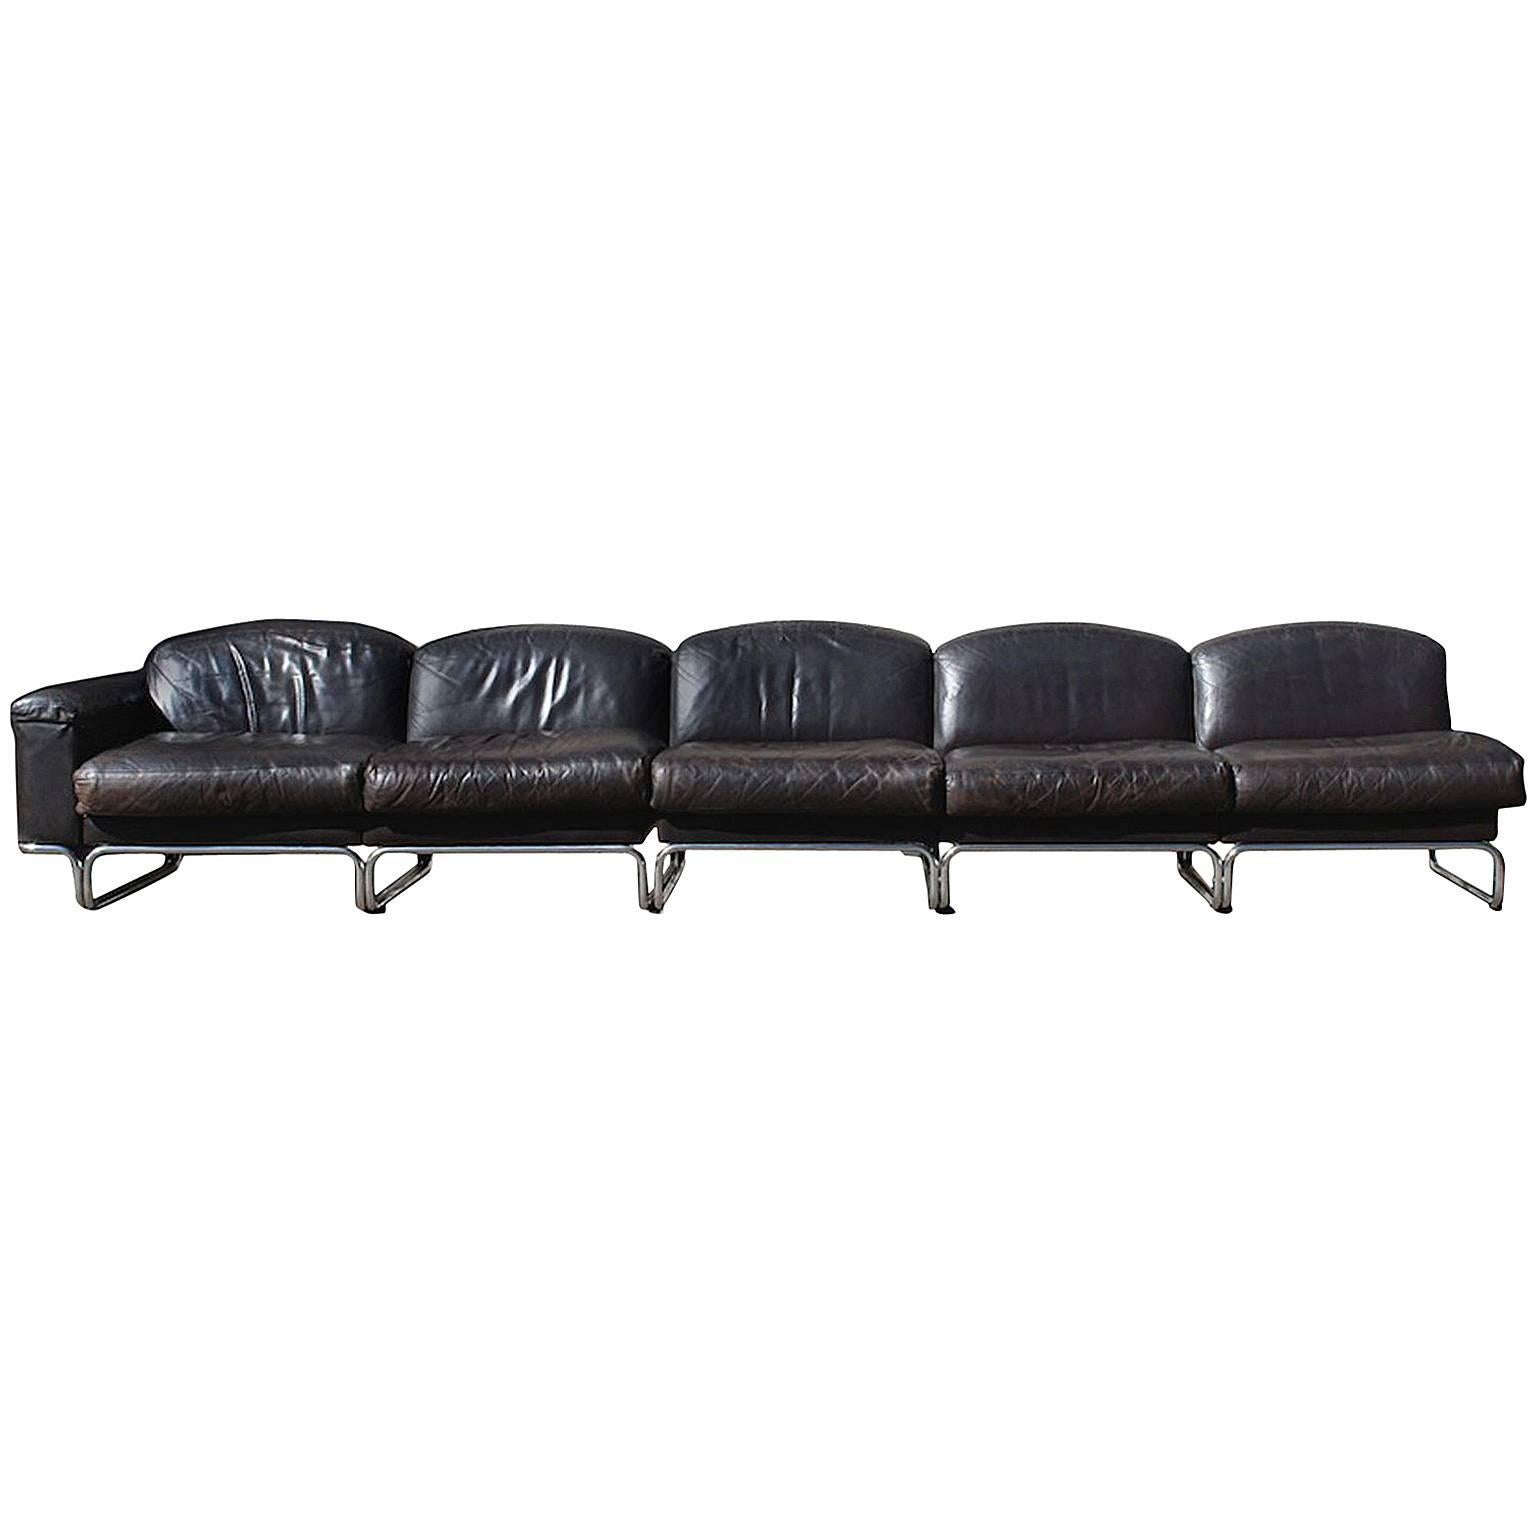 Vintage Leather and Steel Modular Sofa by Topform, Dutch Design, 1970s